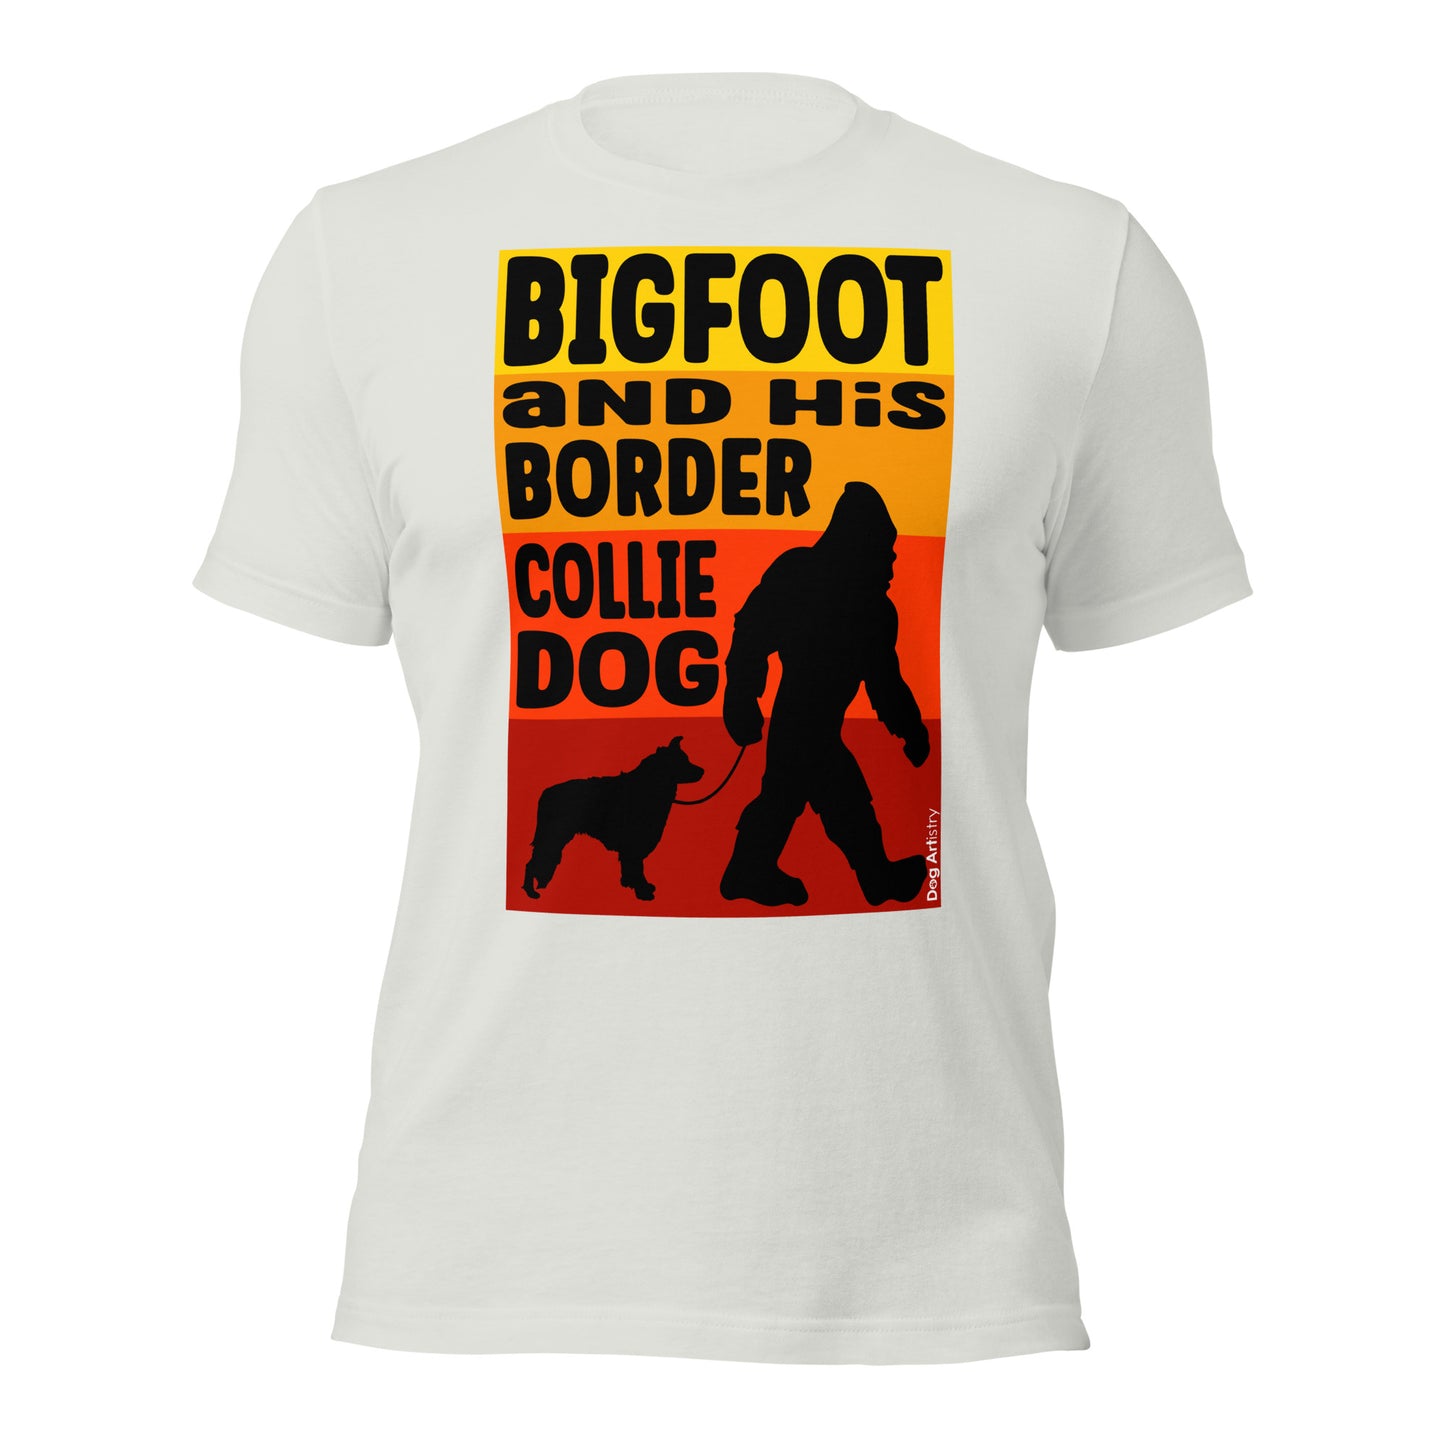 Big foot and his Border Collie unisex silver t-shirt by Dog Artistry.